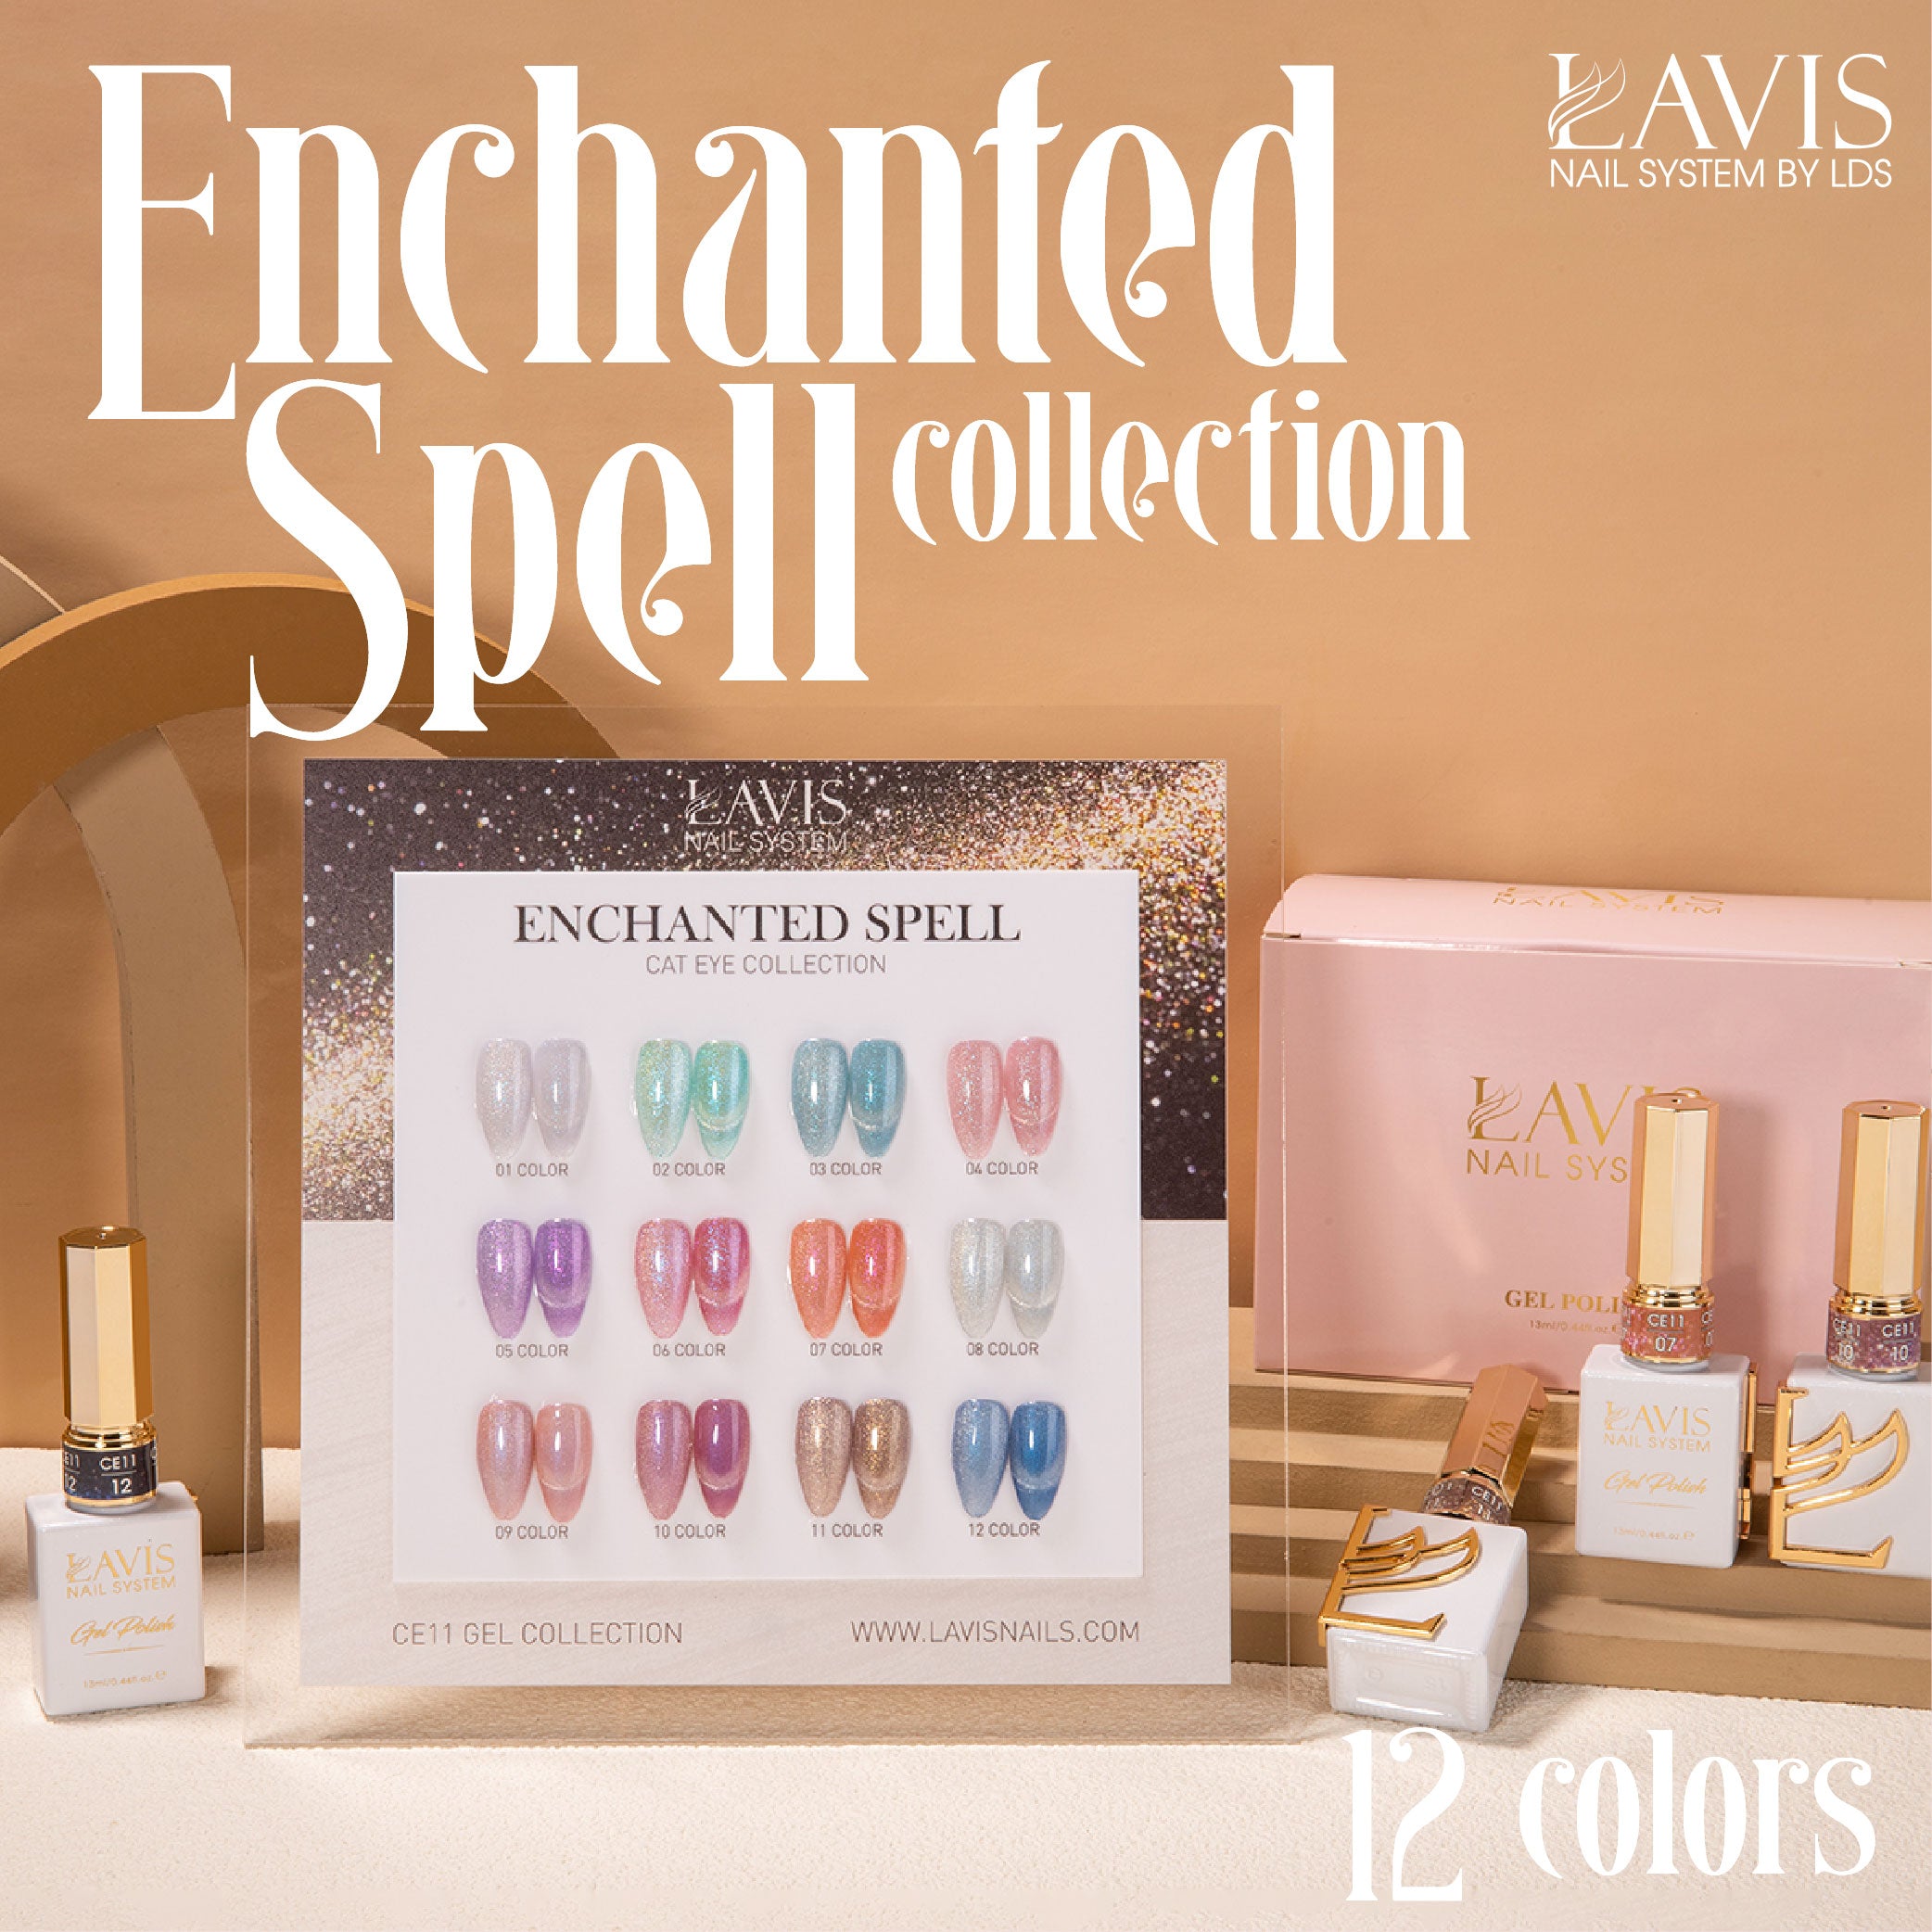 LAVIS Cat Eyes CE11 - 04 - Gel Polish 0.5 oz - Enchanted Spell Collection